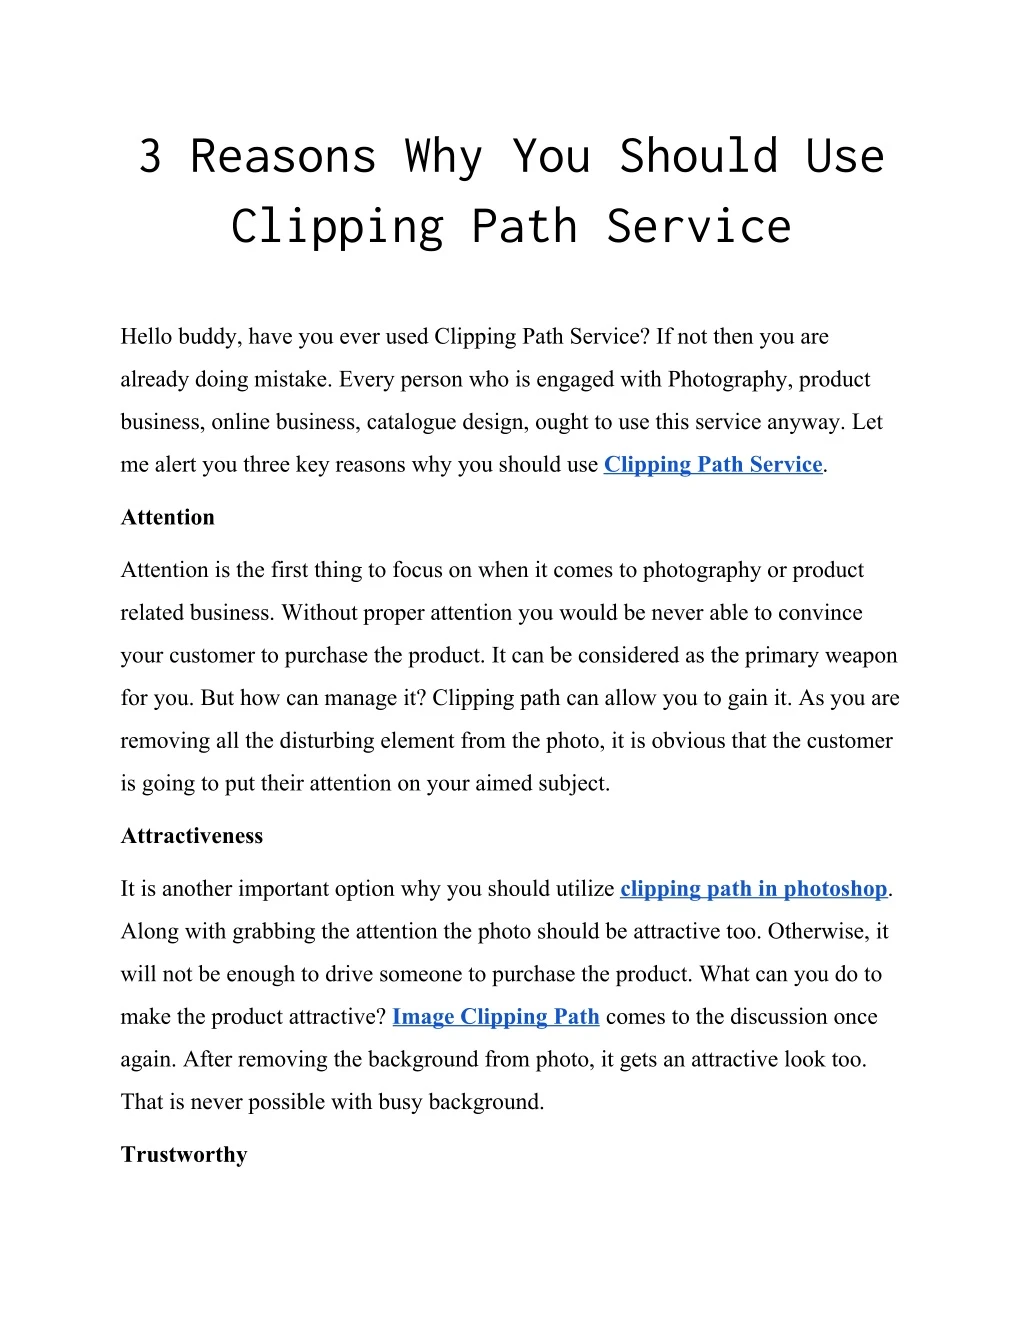 3 reasons why you should use clipping path service